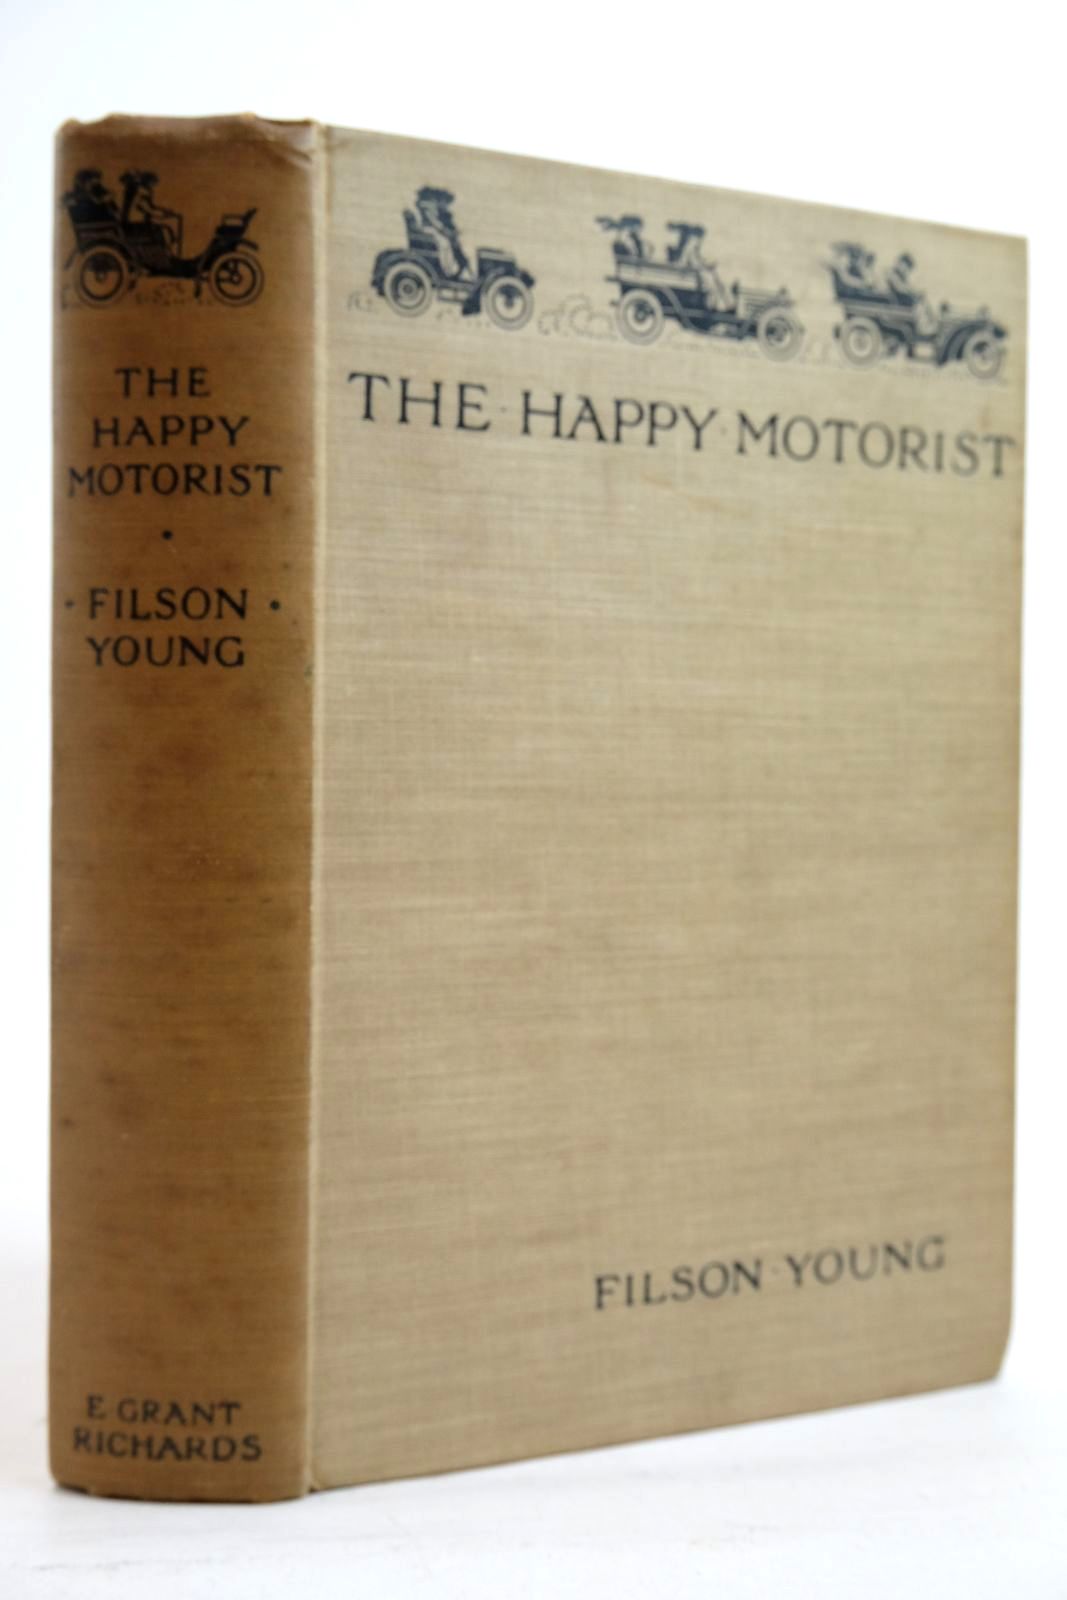 Photo of THE HAPPY MOTORIST written by Young, Filson published by E. Grant Richards (STOCK CODE: 2134619)  for sale by Stella & Rose's Books